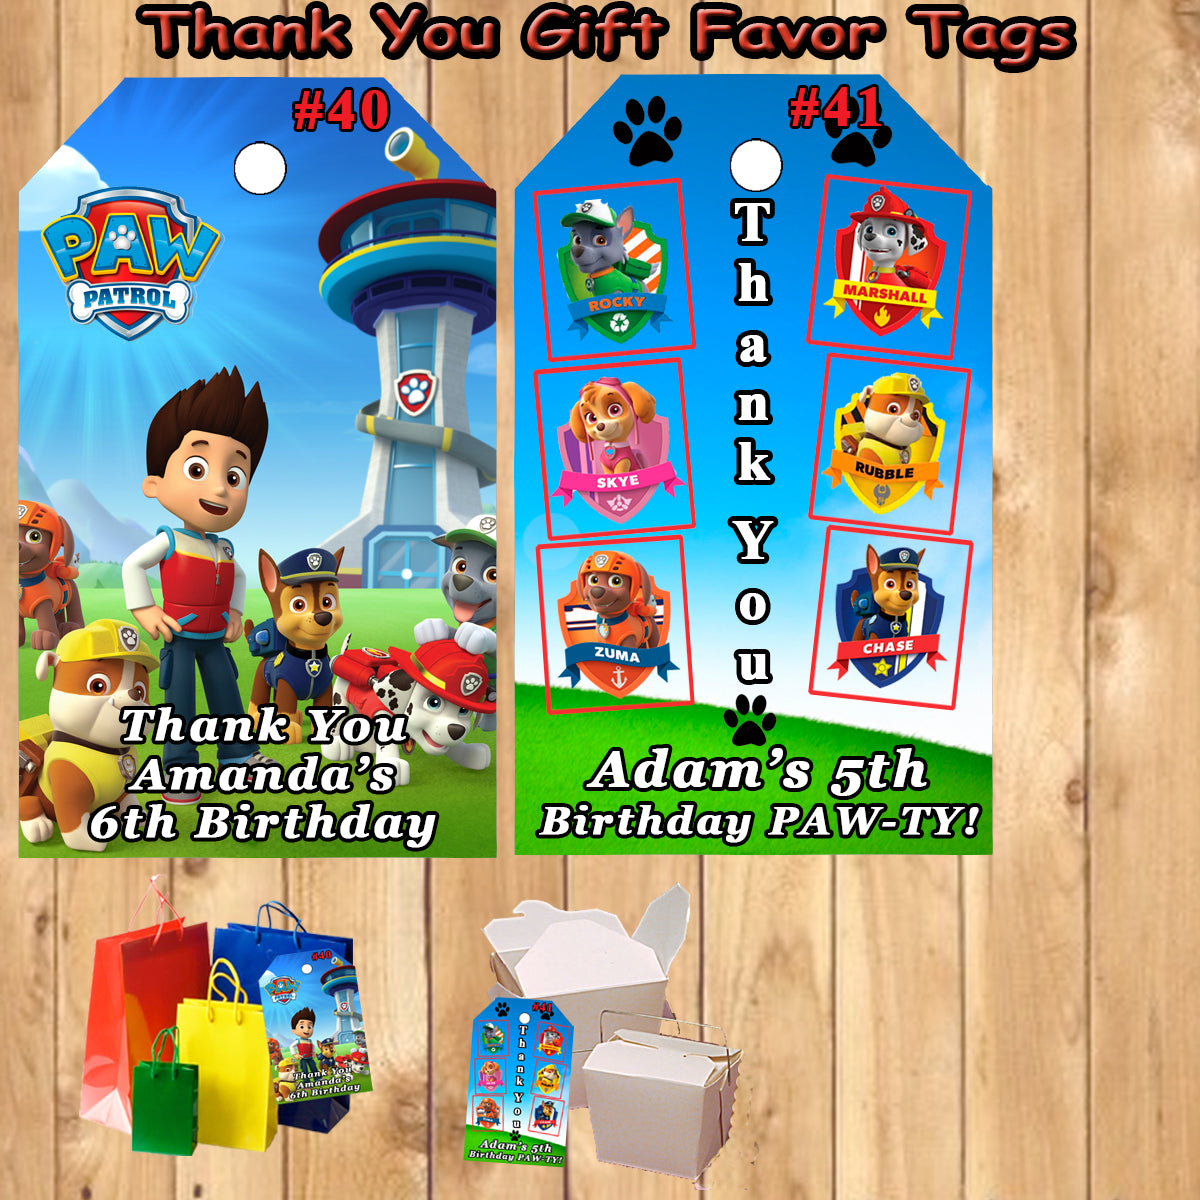 Paw Patrol Printed Birthday Favor Thank You Gift Tags 10 ea Personalized  Custom Made